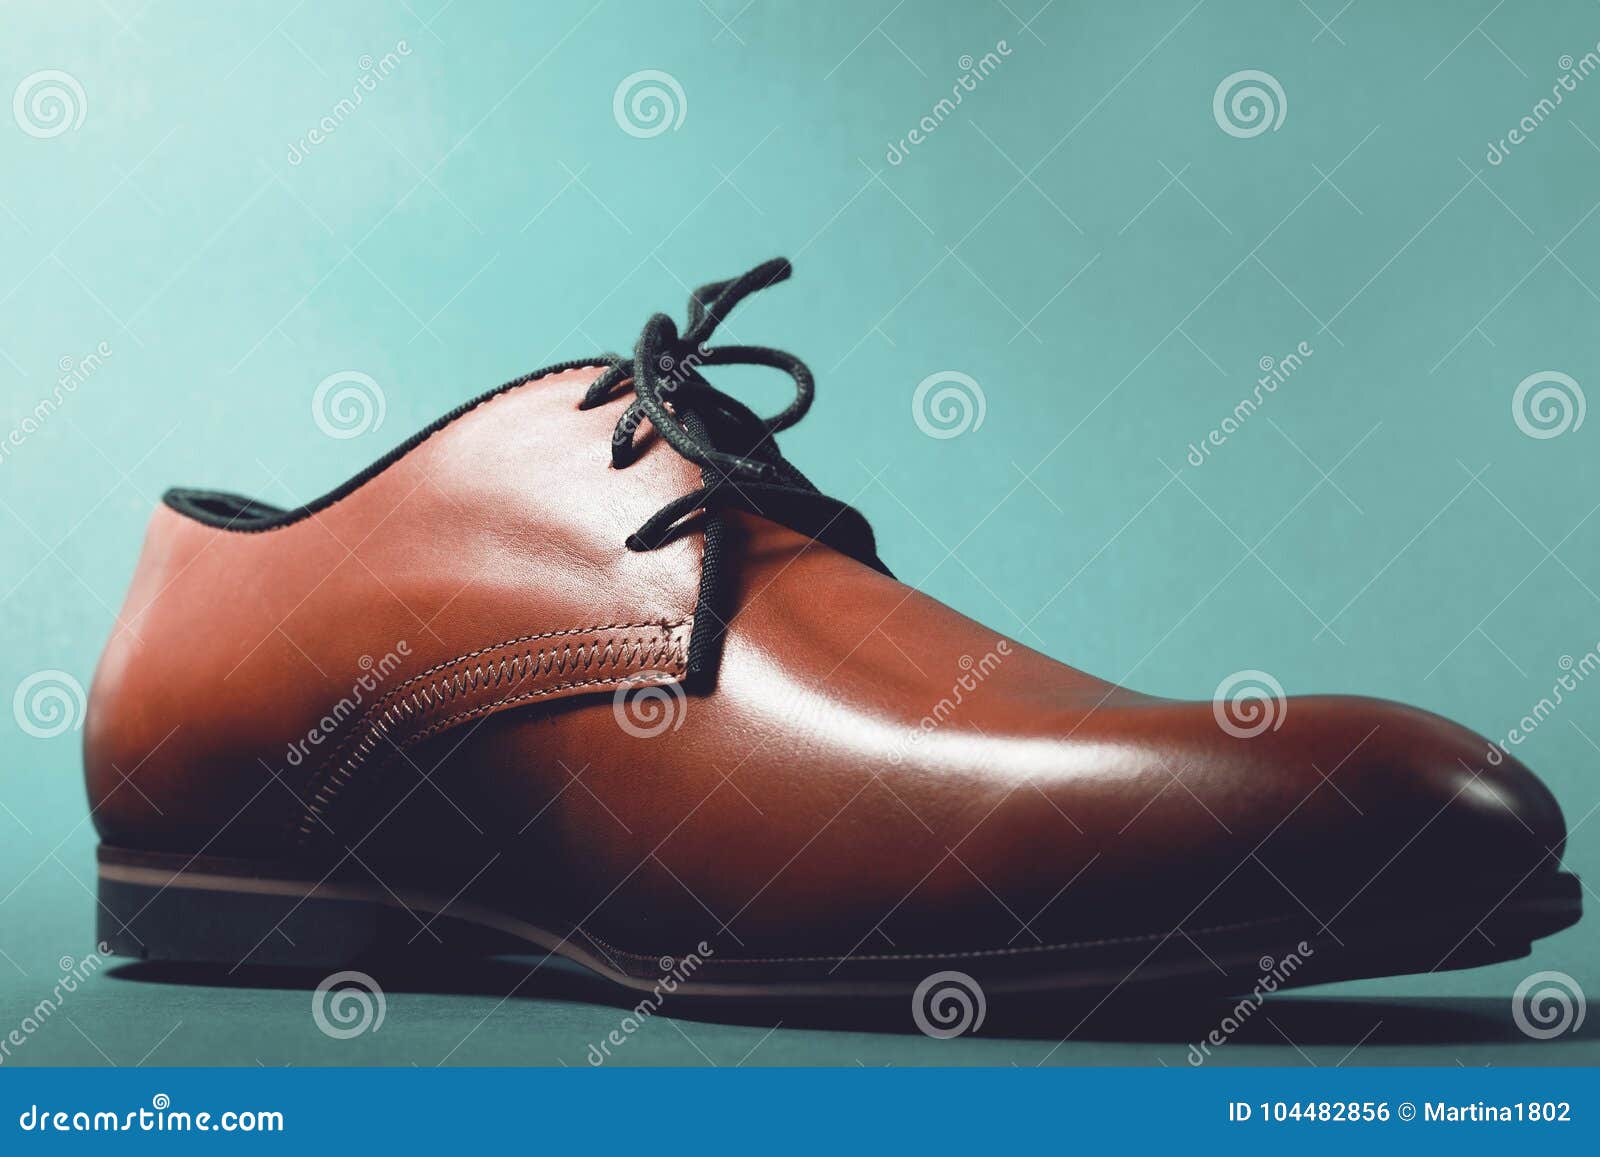 Brown Leather Executive Shoes Stock Photo - Image of formal, lace ...